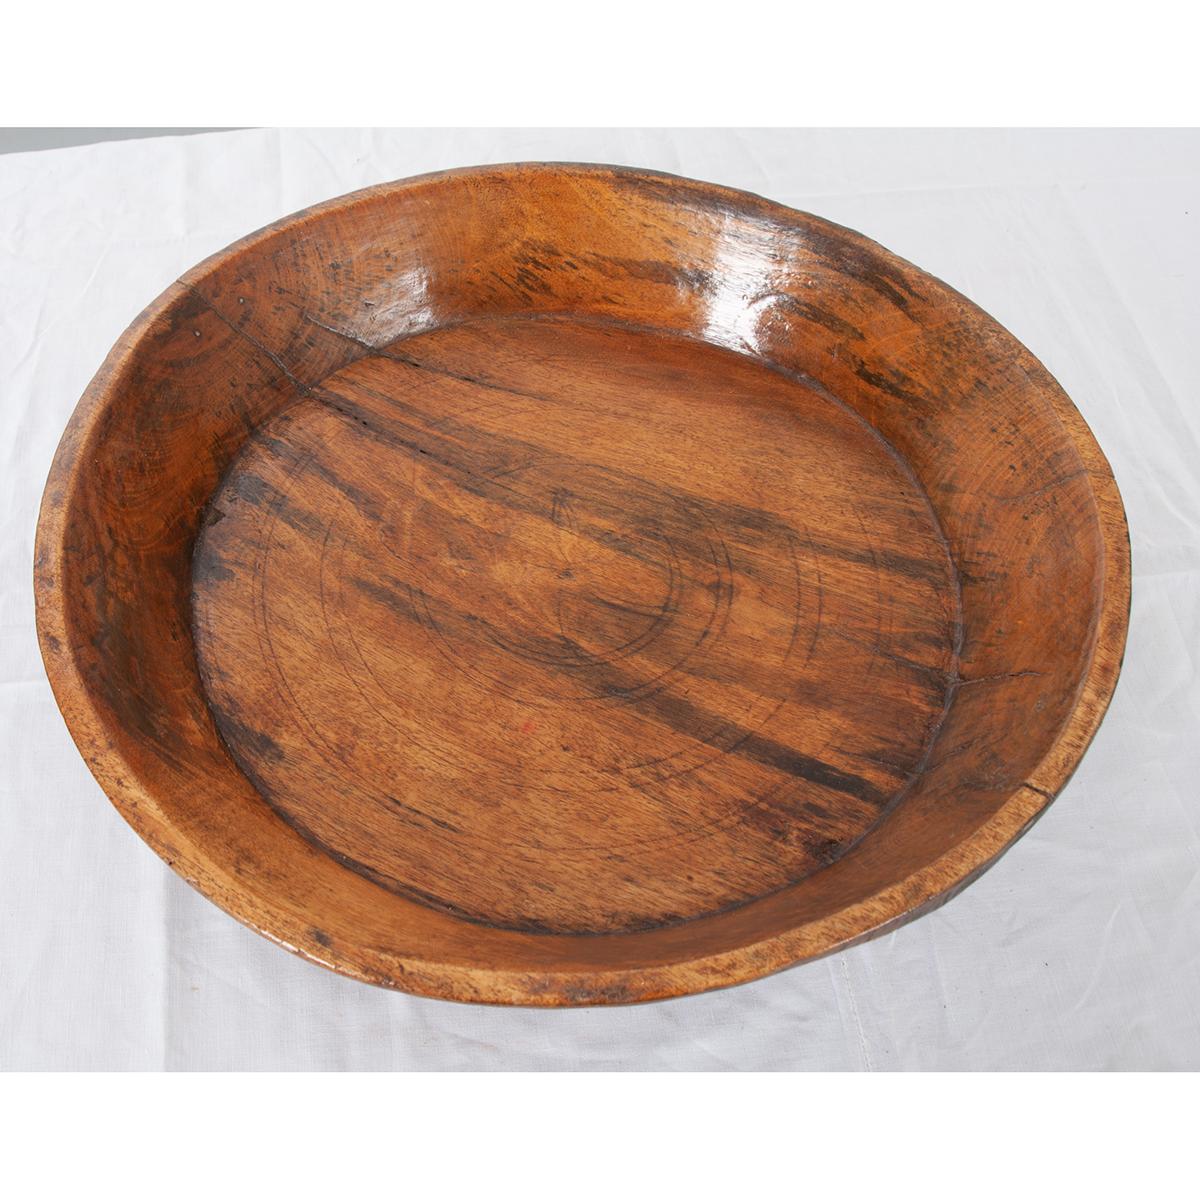 Other Hand Carved Wood Bowl